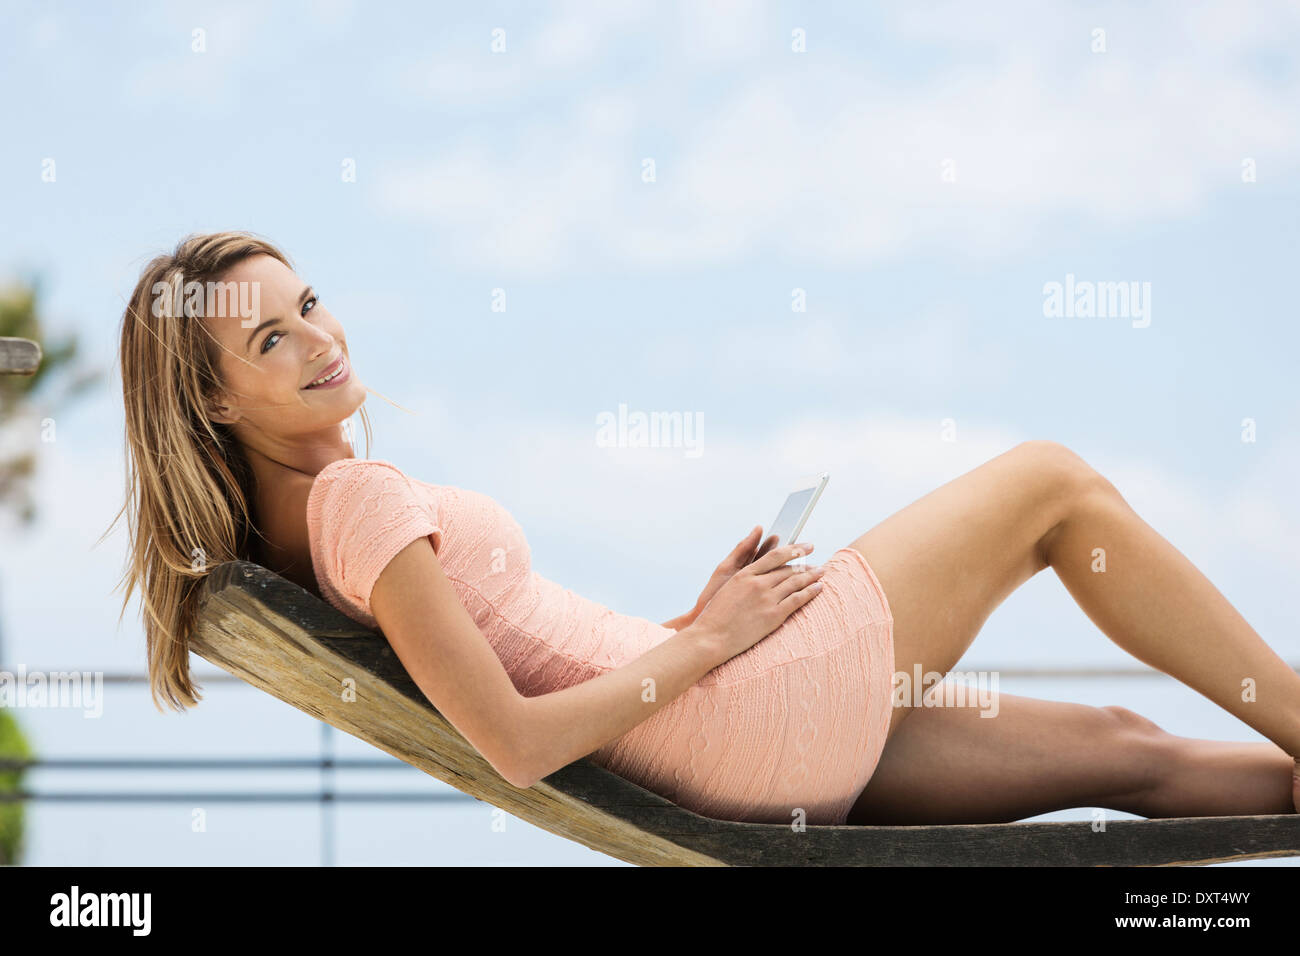 Portrait of smiling woman using digital tablet on lounge chair Stock Photo